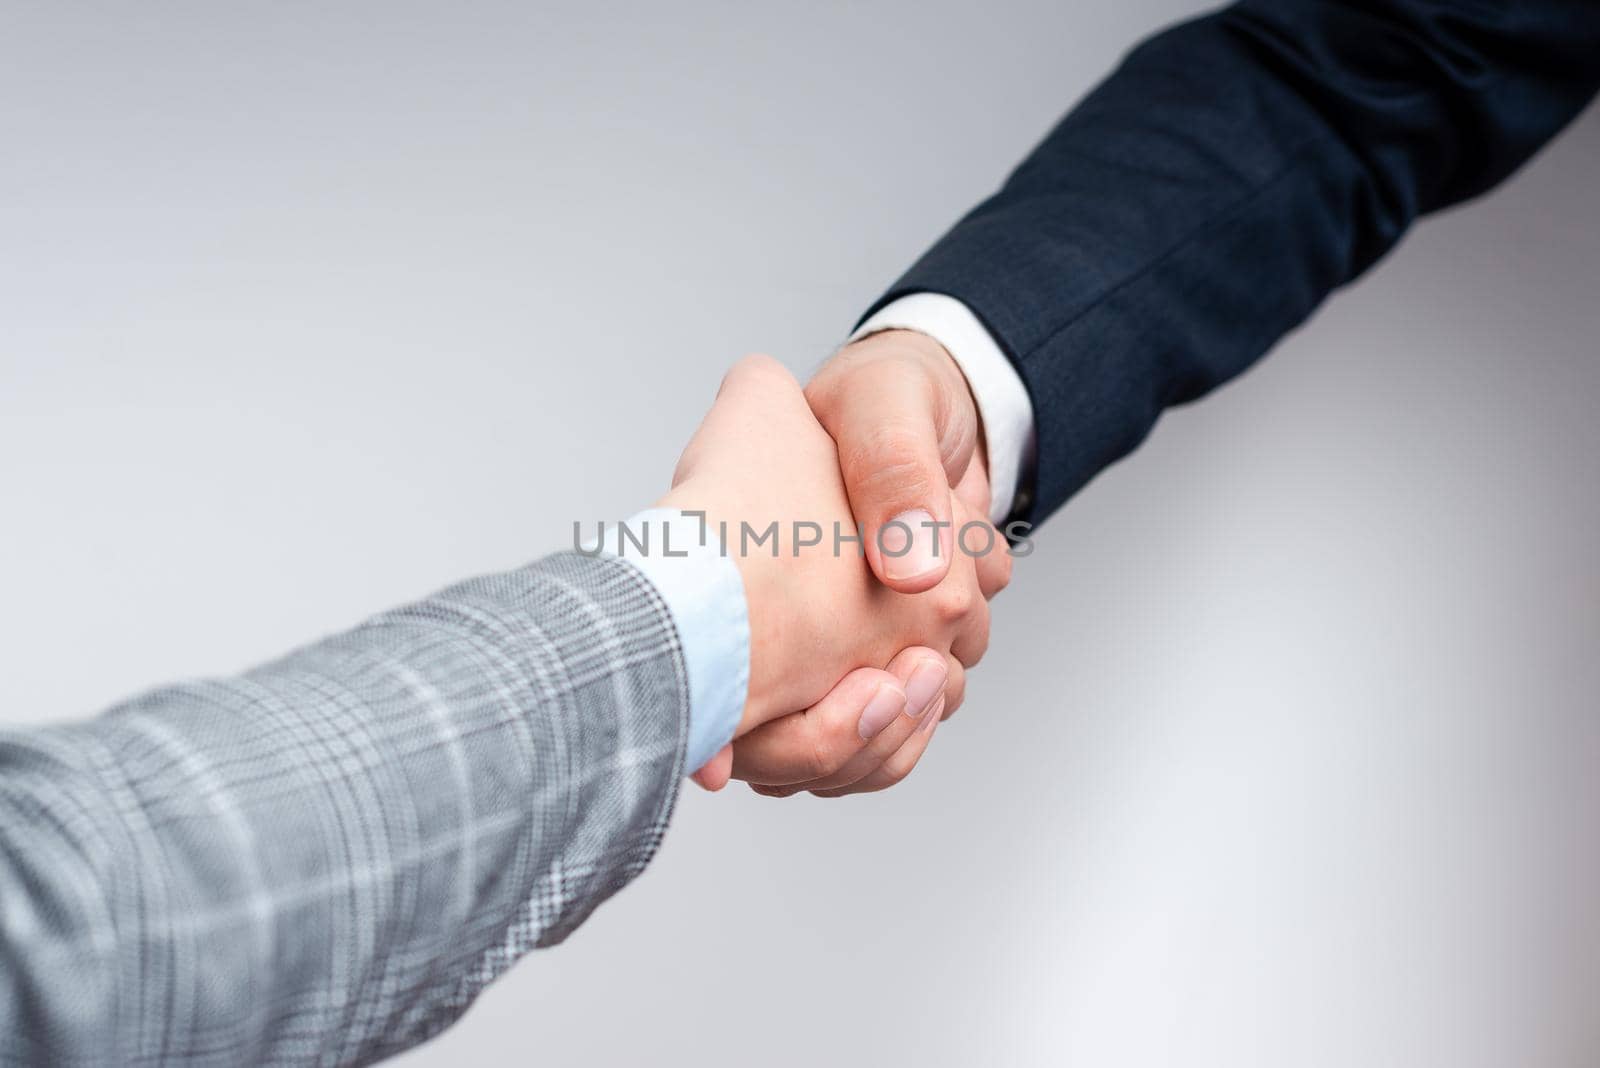 Corporate Businessmen Handshake Indoors.Two People Professionally Well Dressed Gesturing Togetherness.Working Colleague Partners Sign Deal In Agreement To Contract by nialowwa